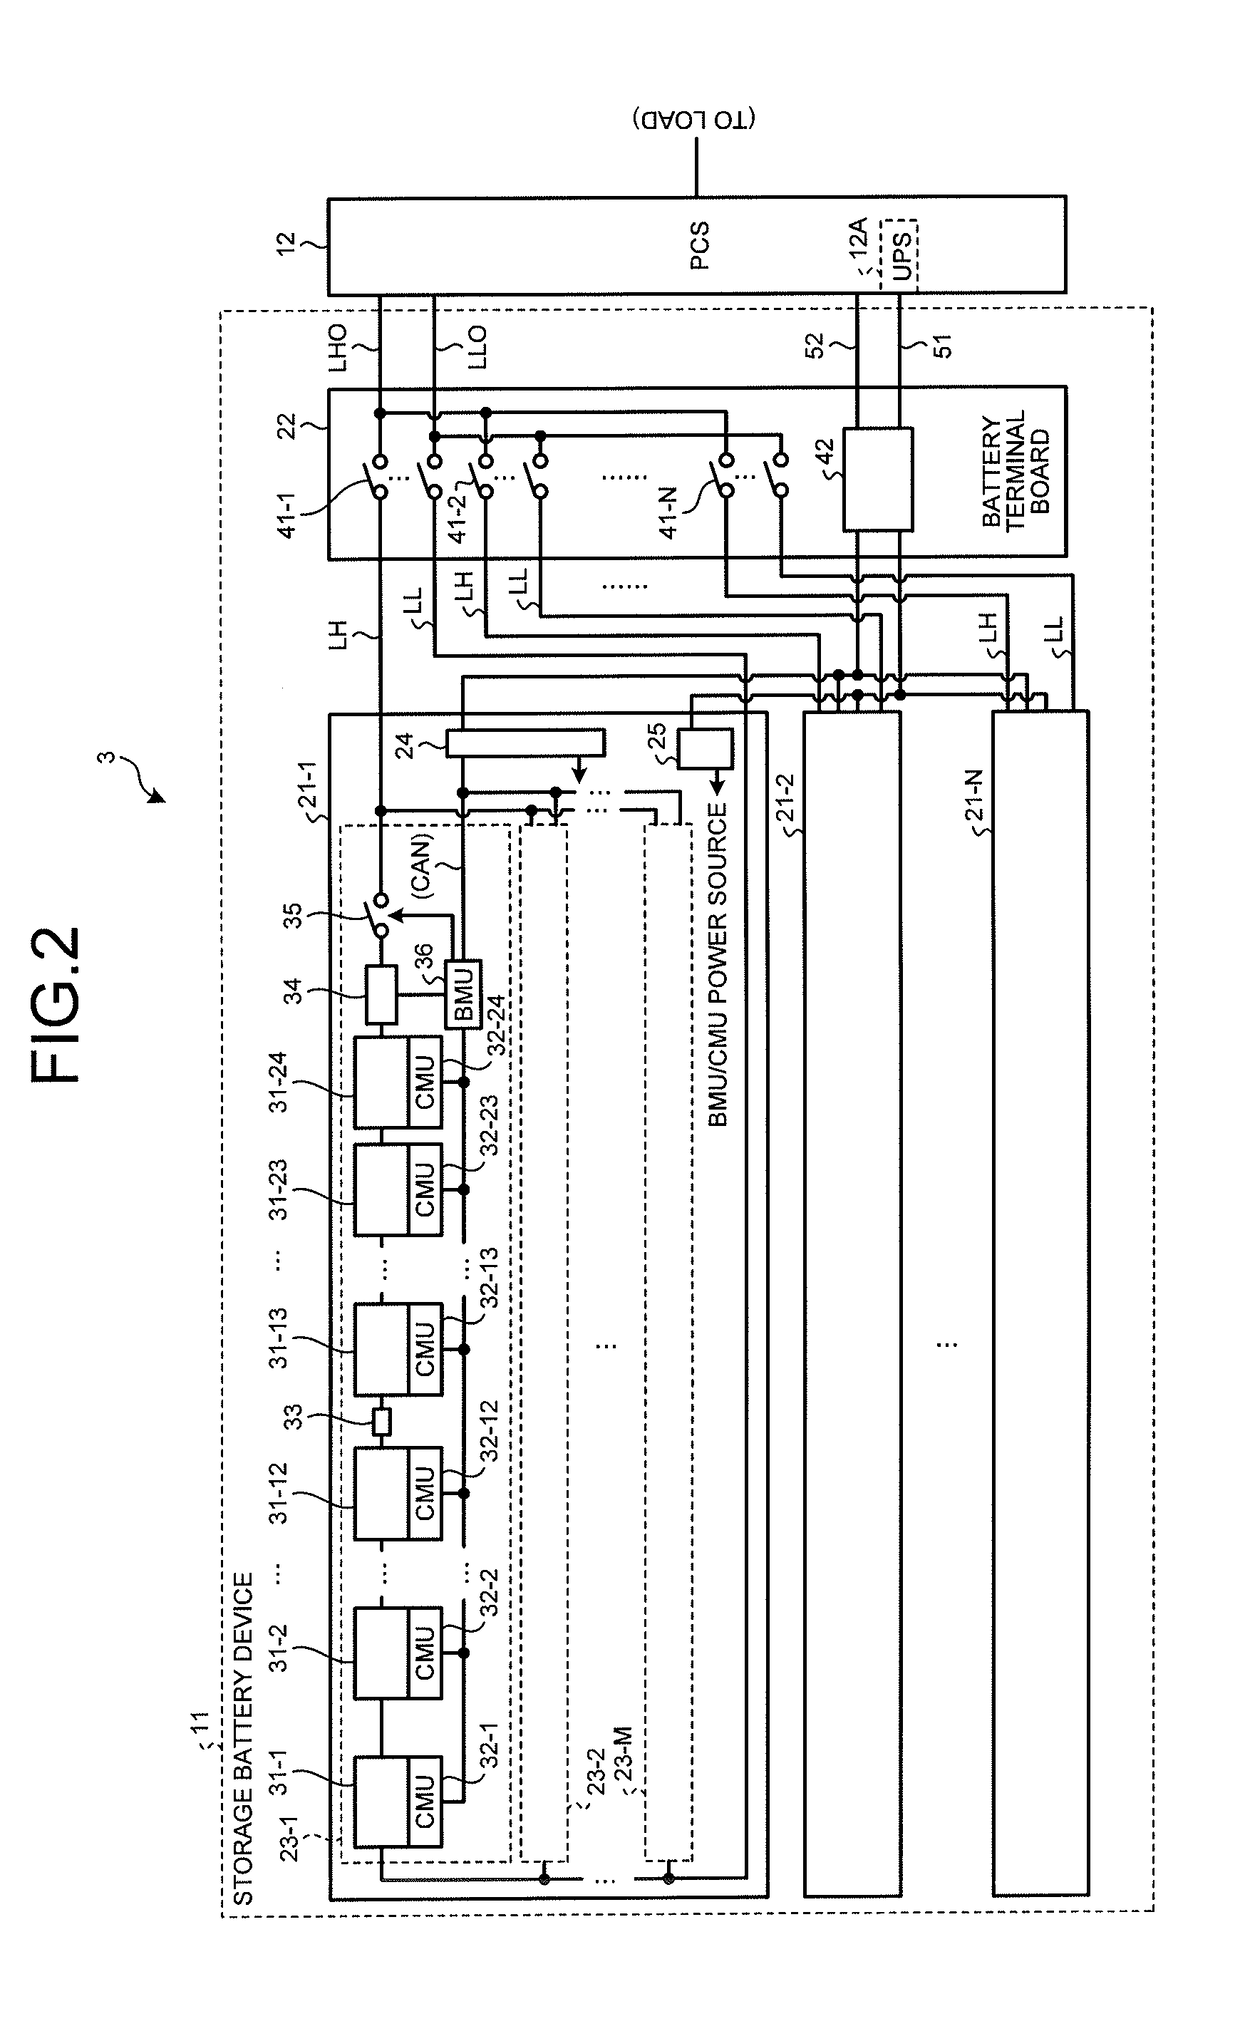 Storage battery device, storage battery system, method and computer program product